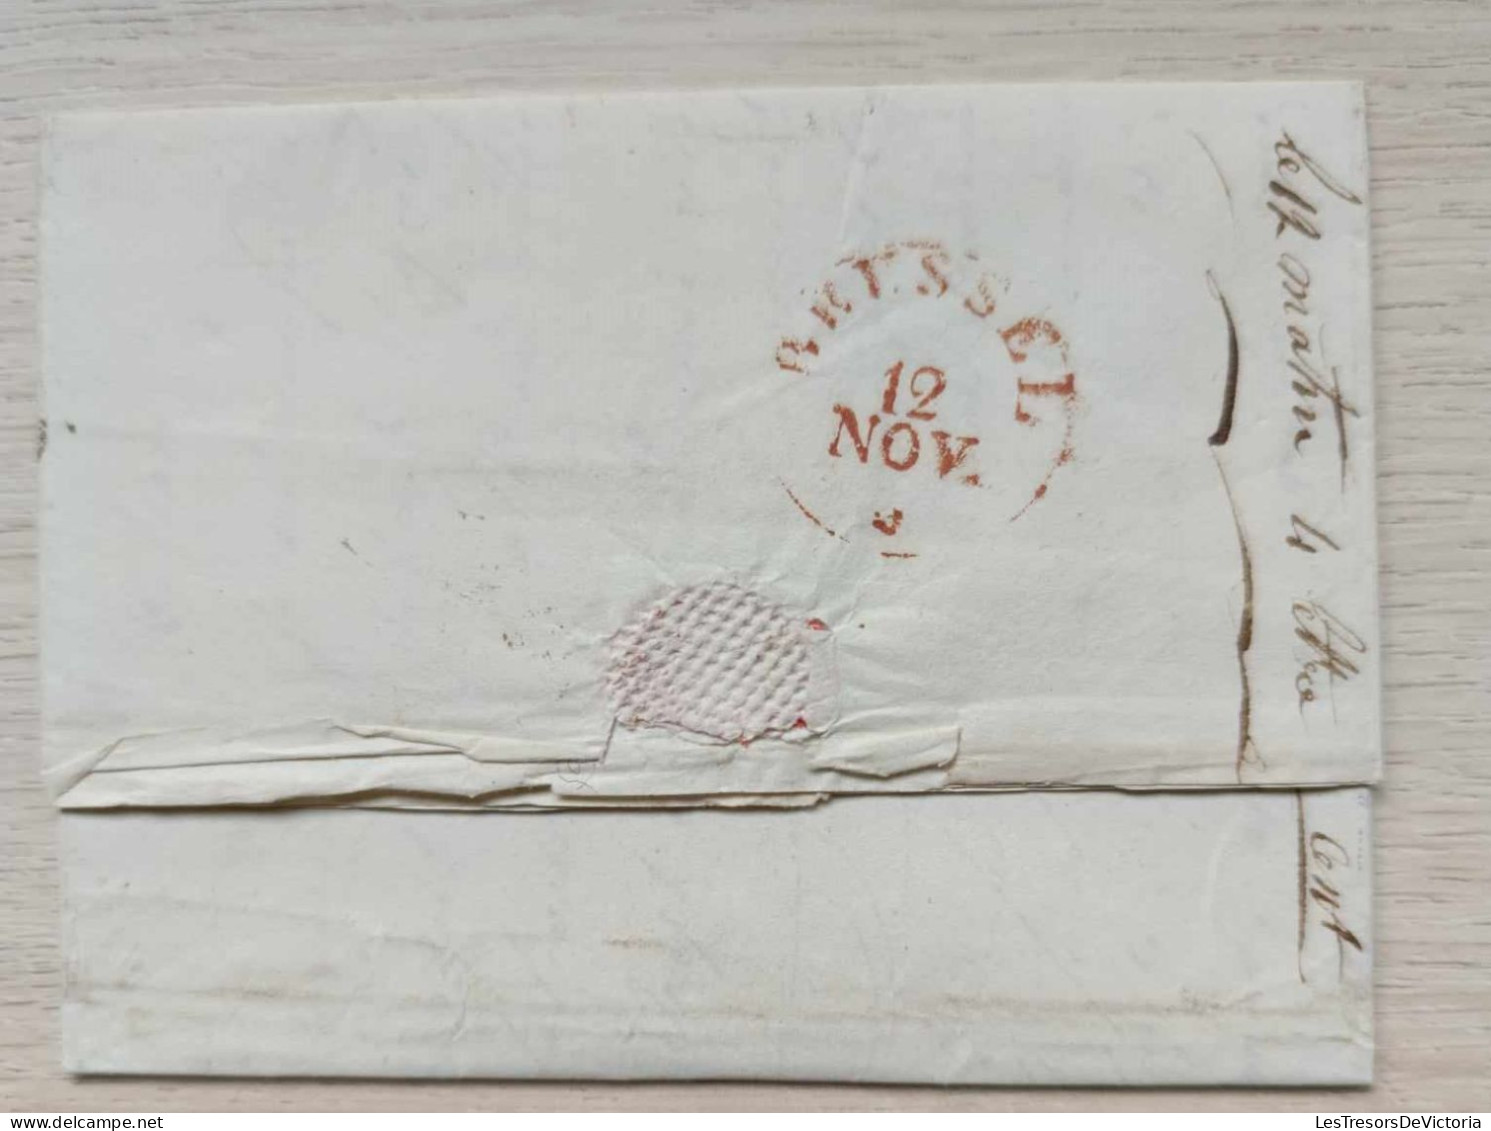 Belgique - Letter From Verviers Mailed On November 21st 1829 To Brussels - Weight 16ws Wigtjes - 1815-1830 (Hollandse Tijd)